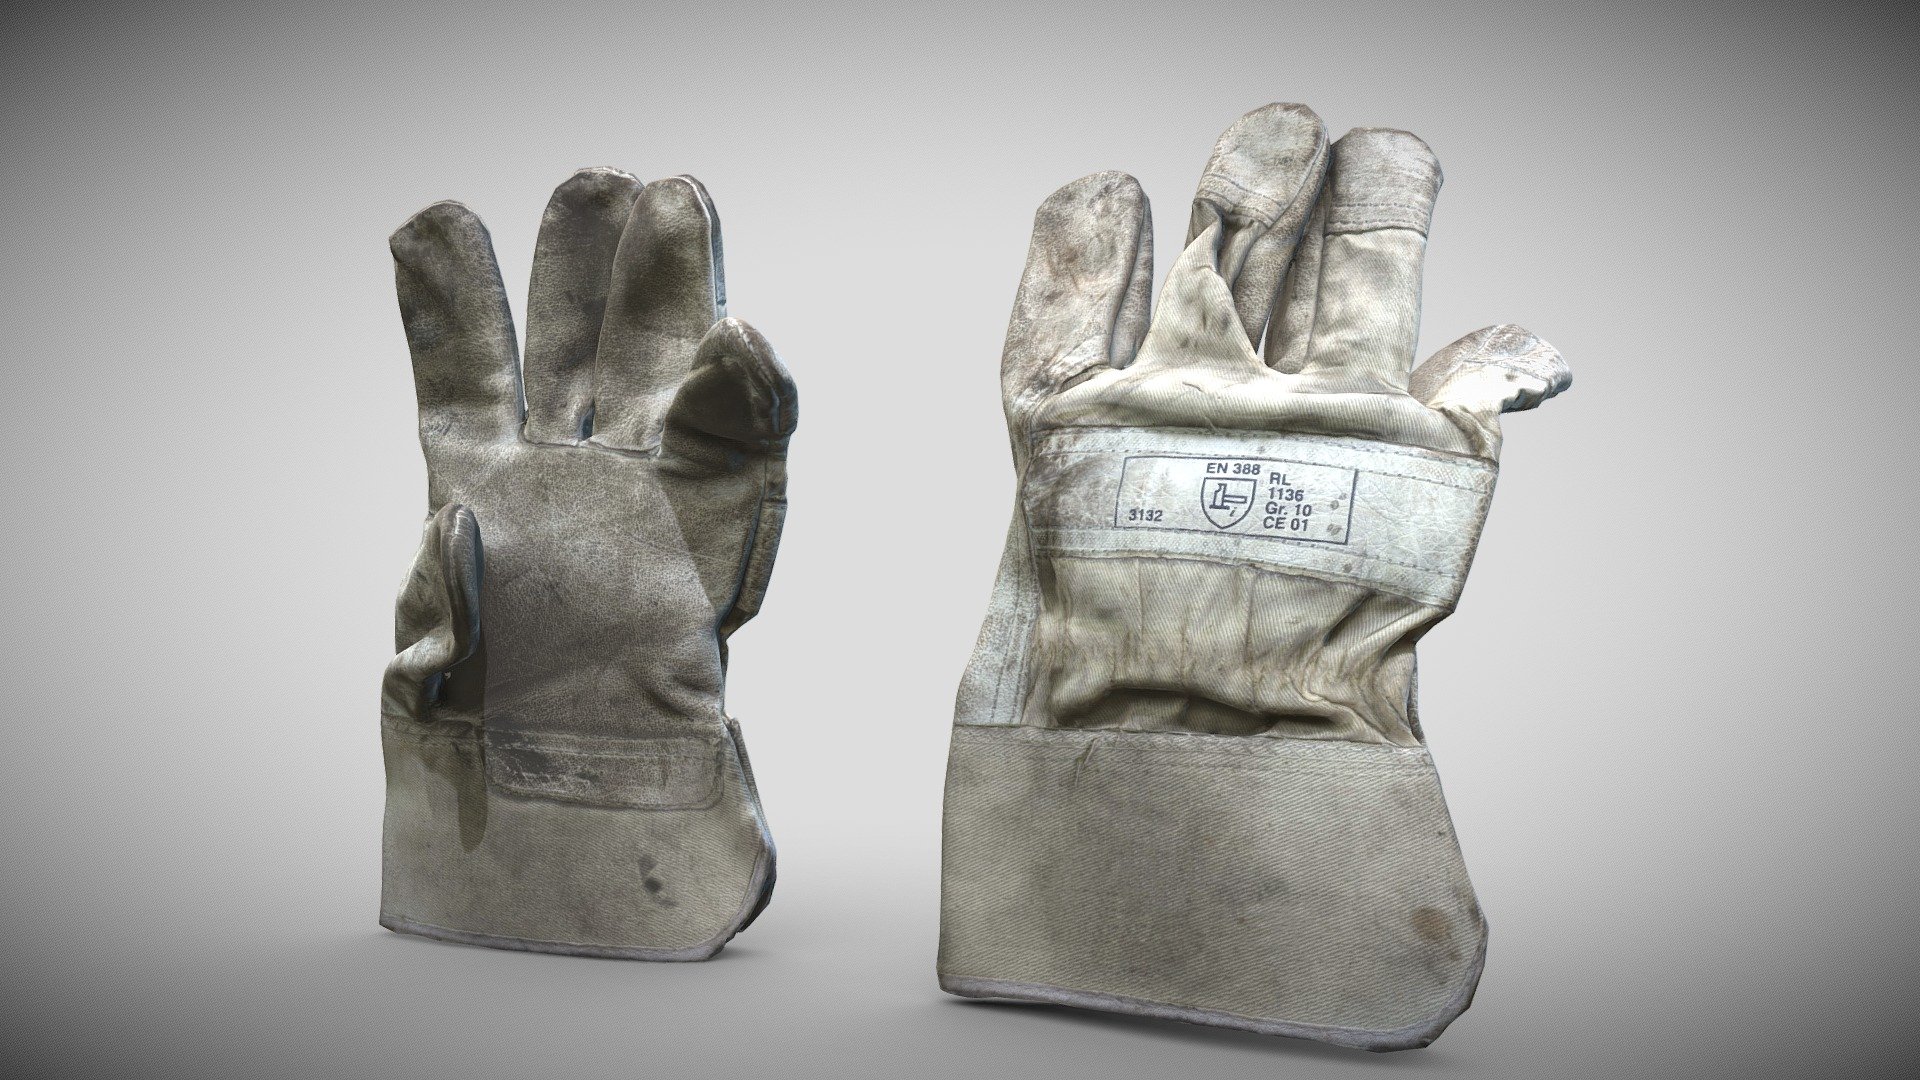 Upon request, we scanned this glove.

Please leave a comment and visit us on our website https://meshfinder.de/ - Glove (Photogrammetry) - Buy Royalty Free 3D model by Meshfinder 3d model